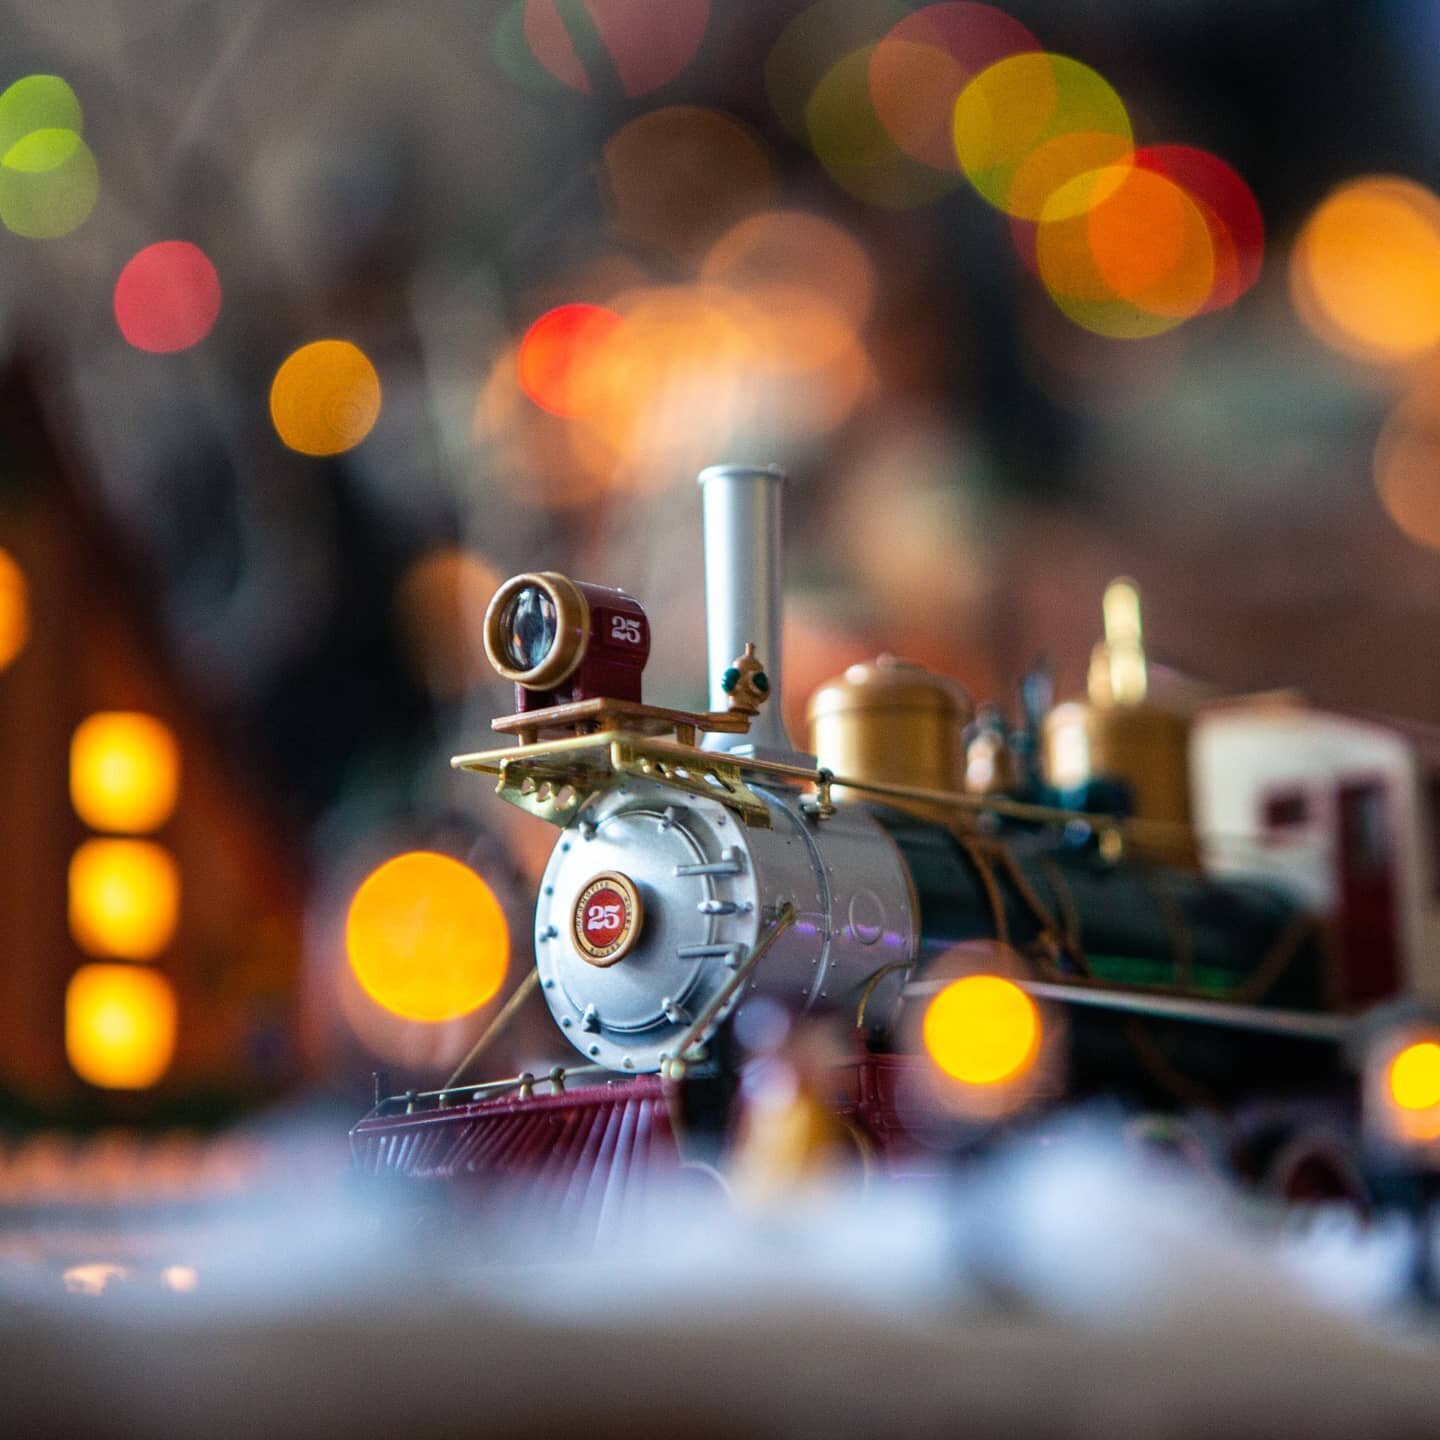 Christmas Train Models?

I'm not a big macro photography guy, but these were still fun shots to take. 

Jim Whitaker, a resident of Seal Beach, recreates his train set every year. He usually starts constructing his minature Christmas town in October,